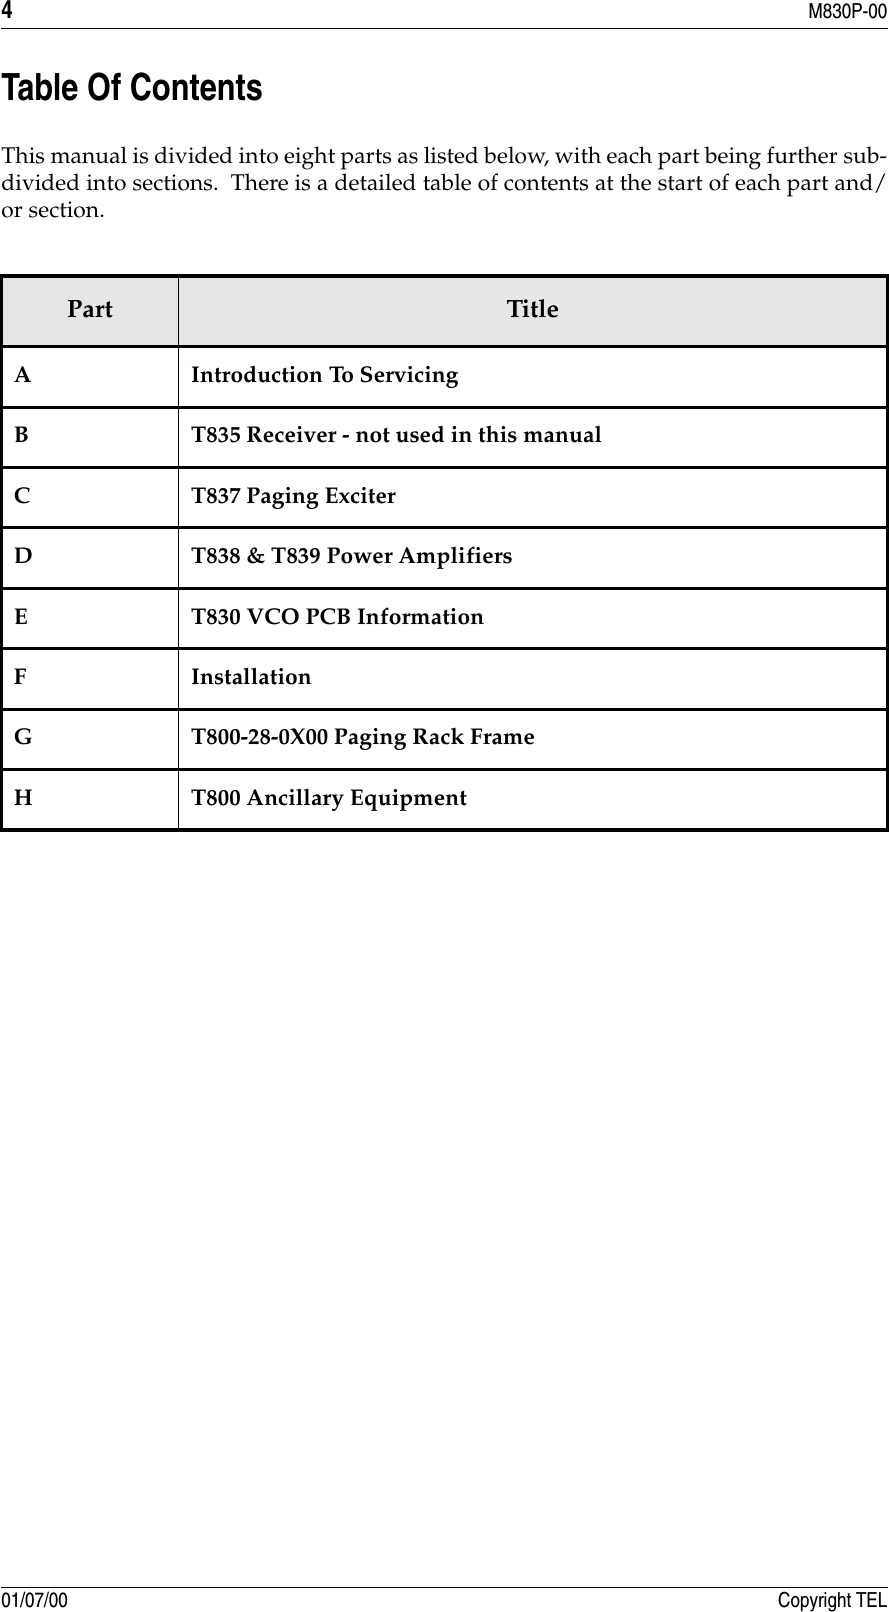 4M830P-0001/07/00 Copyright TELTable Of ContentsThis manual is divided into eight parts as listed below, with each part being further sub-divided into sections.  There is a detailed table of contents at the start of each part and/or section.1Part TitleA Introduction To ServicingB T835 Receiver - not used in this manualC T837 Paging ExciterD T838 &amp; T839 Power AmplifiersE T830 VCO PCB InformationF InstallationG T800-28-0X00 Paging Rack FrameH T800 Ancillary Equipment